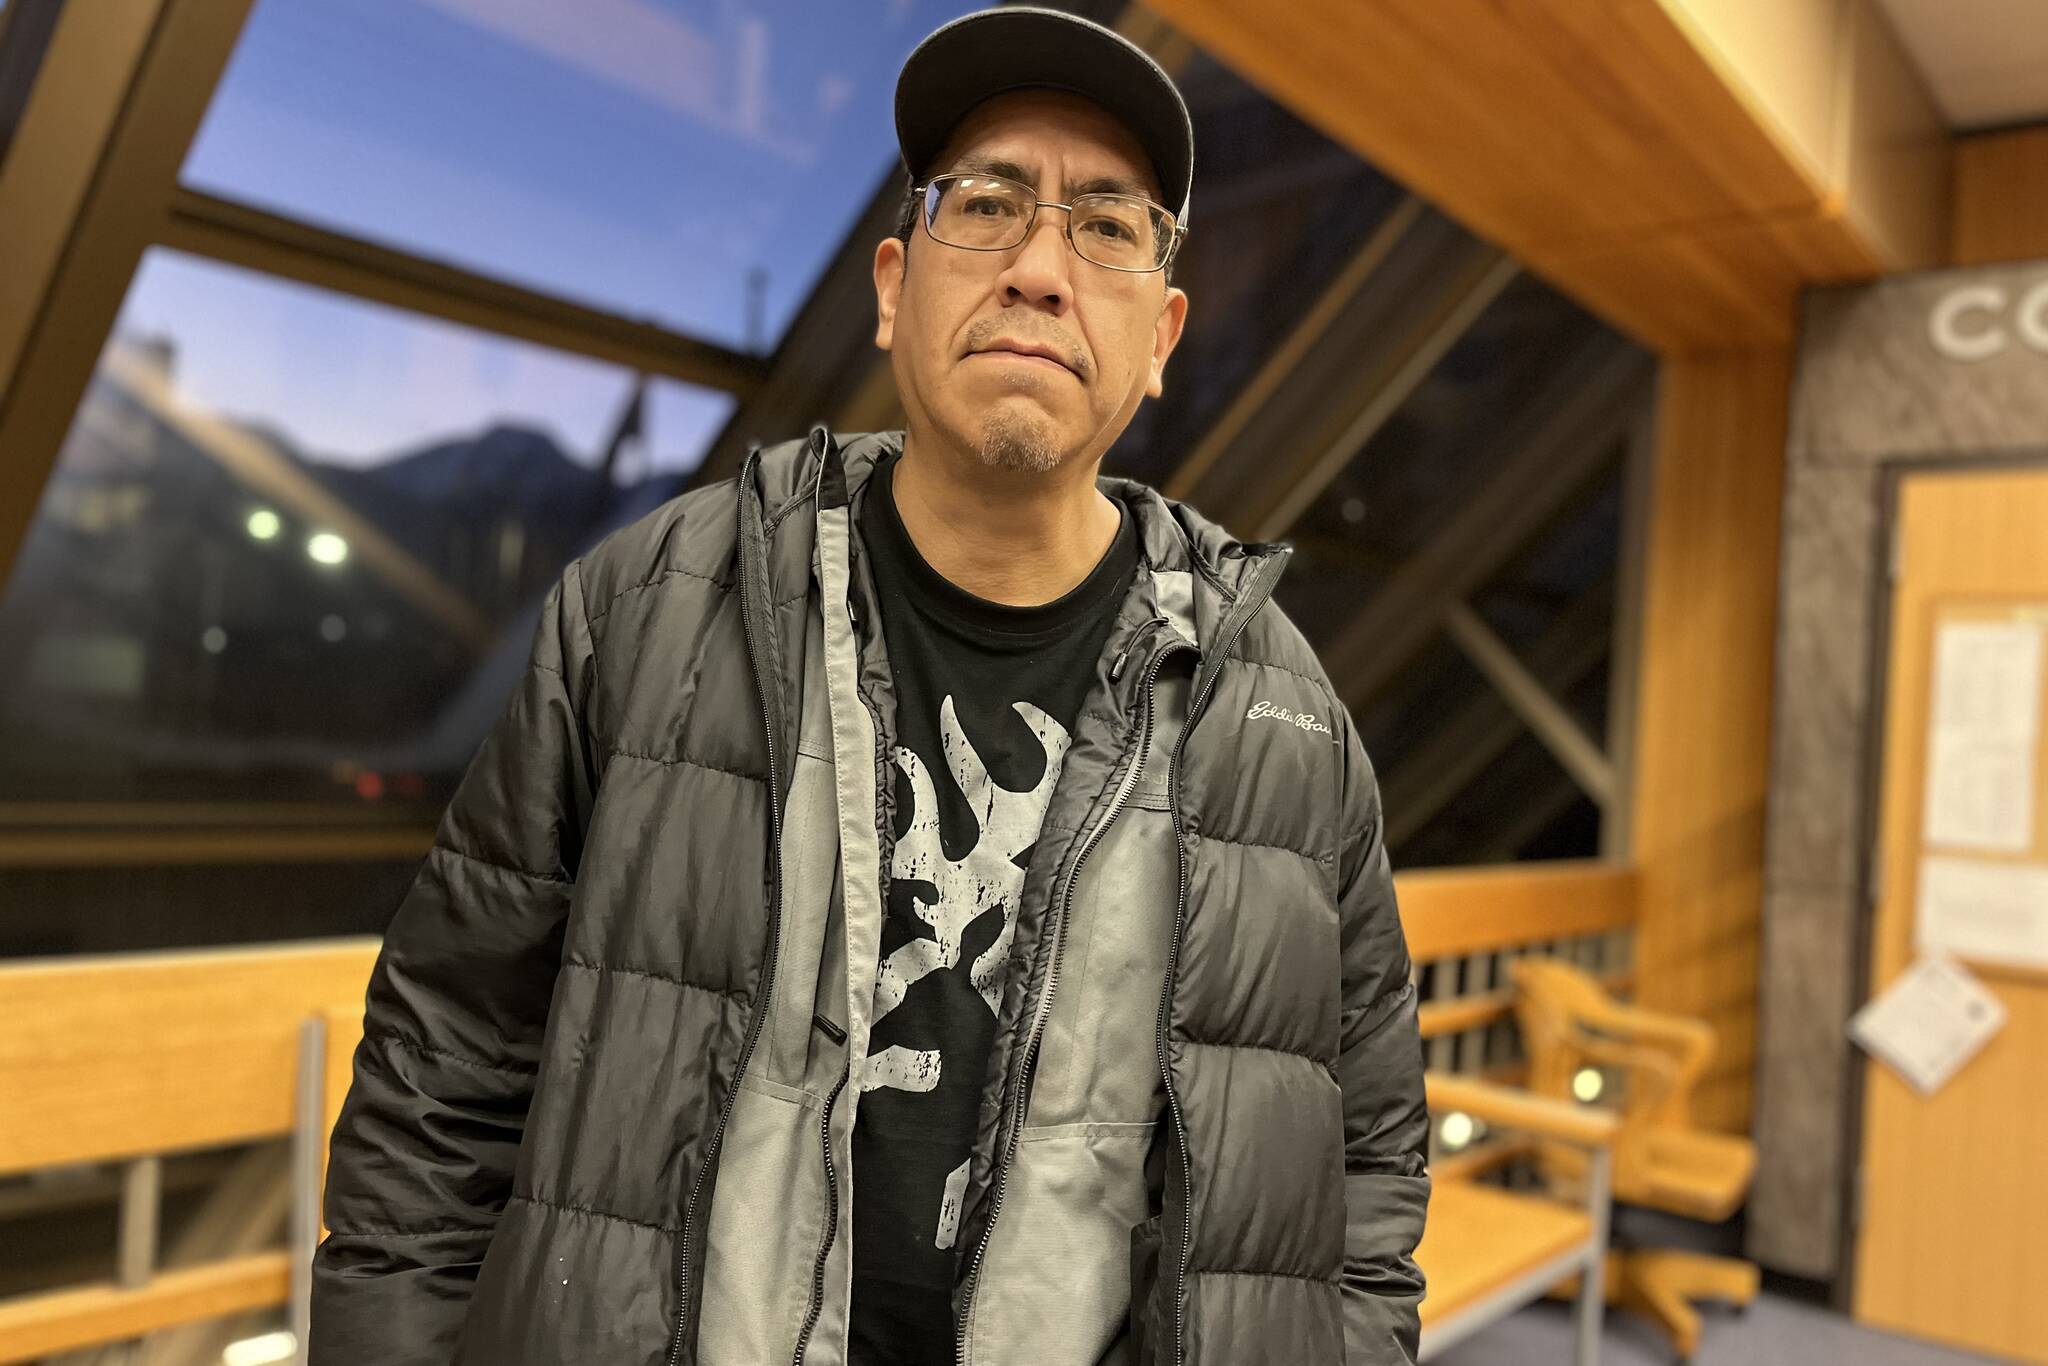 Alfred Torres stands in the lobby on Friday after hearing the judges decision to uphold Ronald Smith’s 70-year prison sentence. Smith was charged for the murder of Kenneth Thomas and assault on Torres in 2001, but due to appeals the case has been retried twice. (Jonson Kuhn / Juneau Empire)